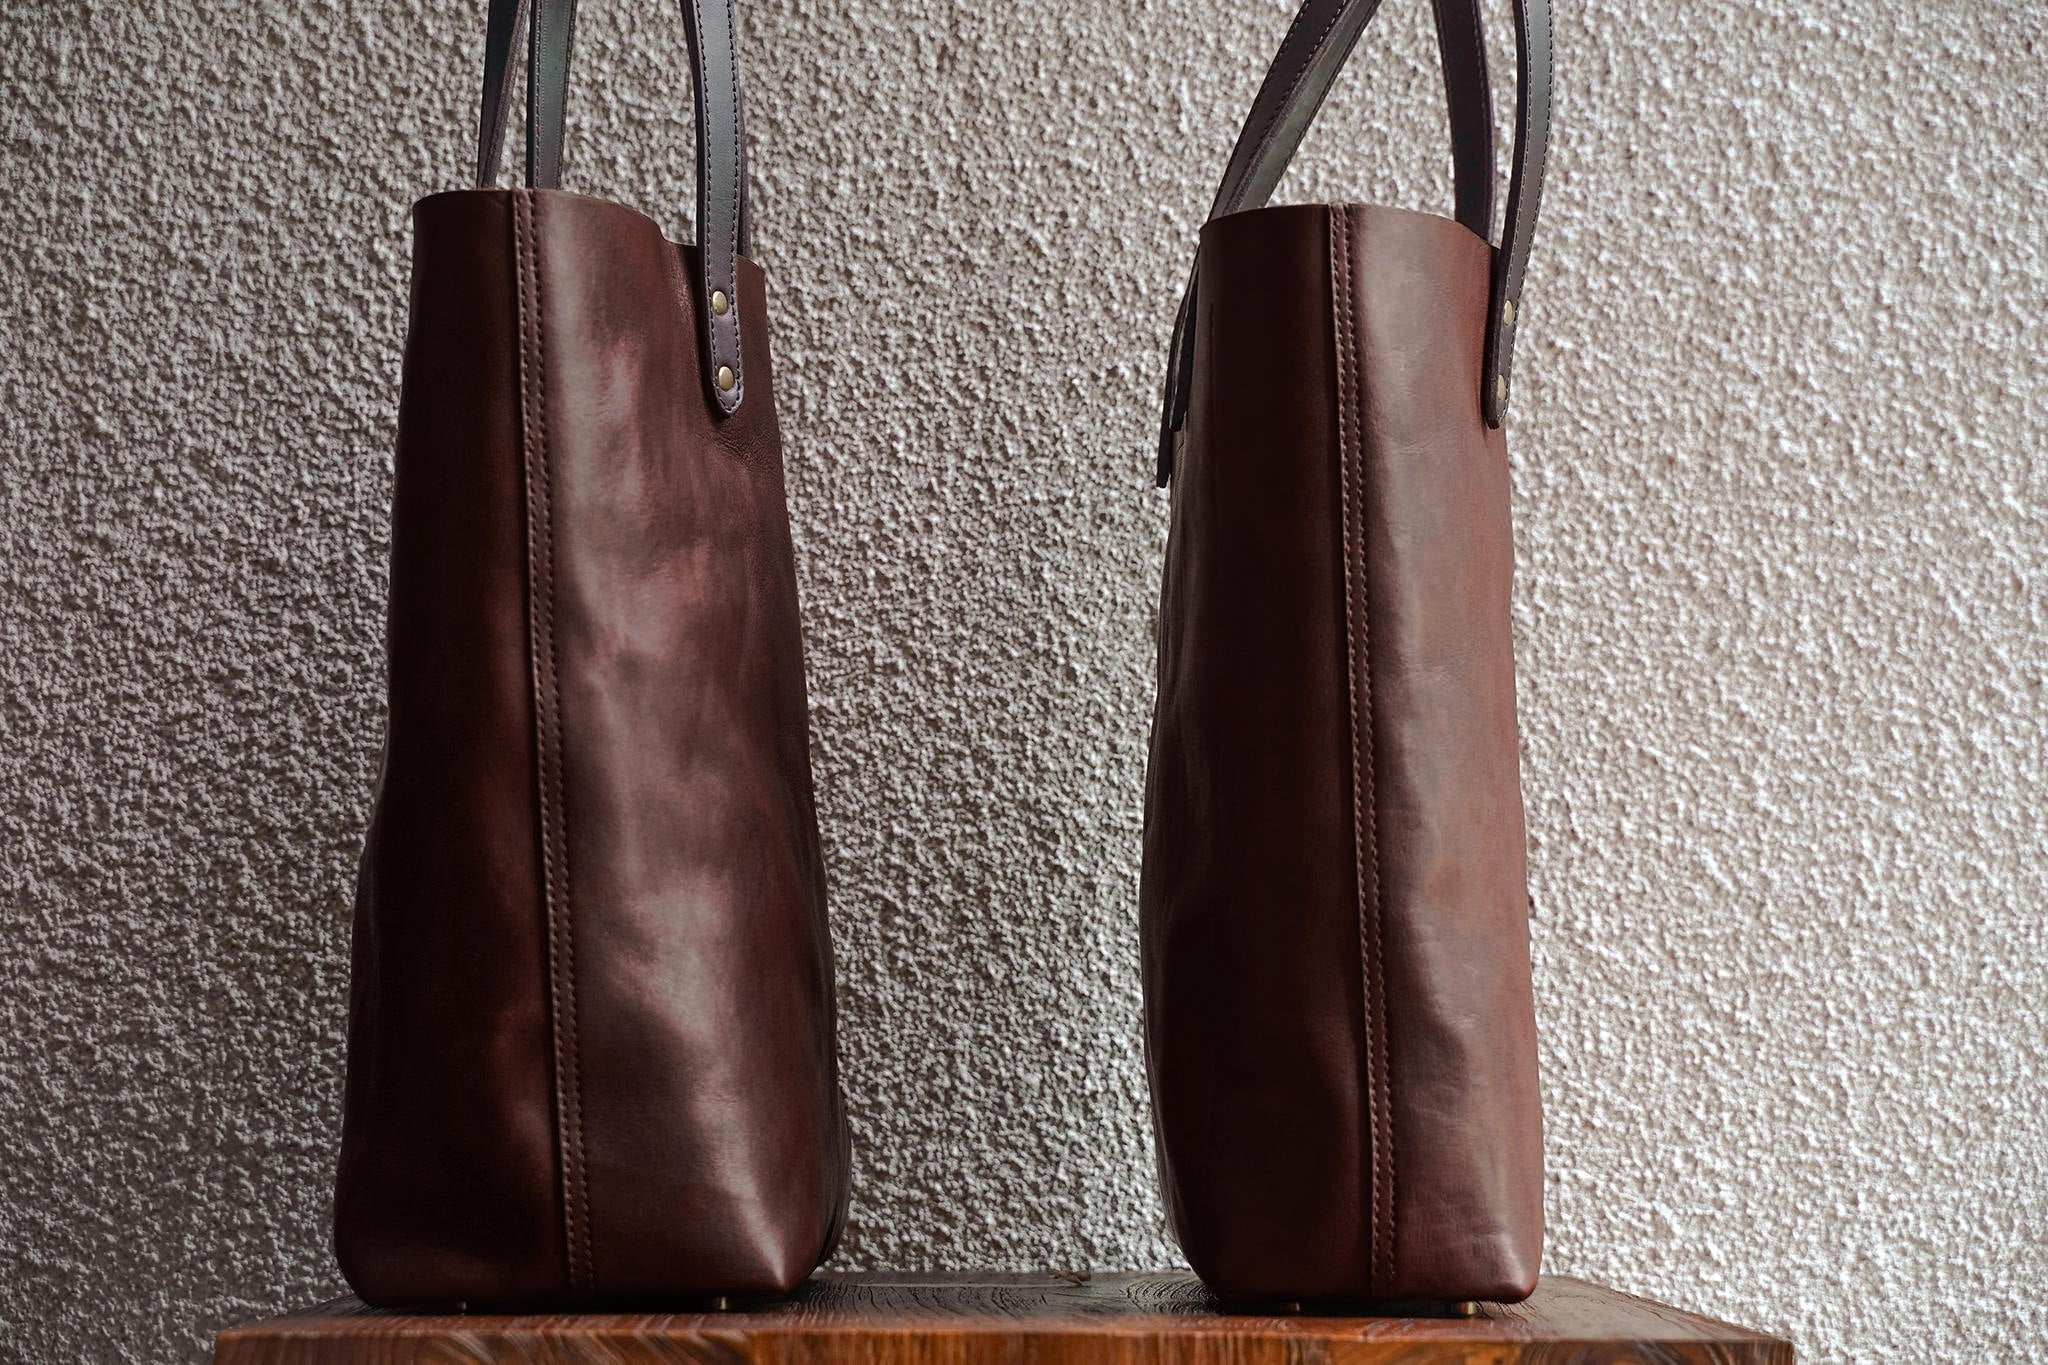 Size comparison between the Work and Slim Tote. Shown here in Fox color. The only difference is the thickness.